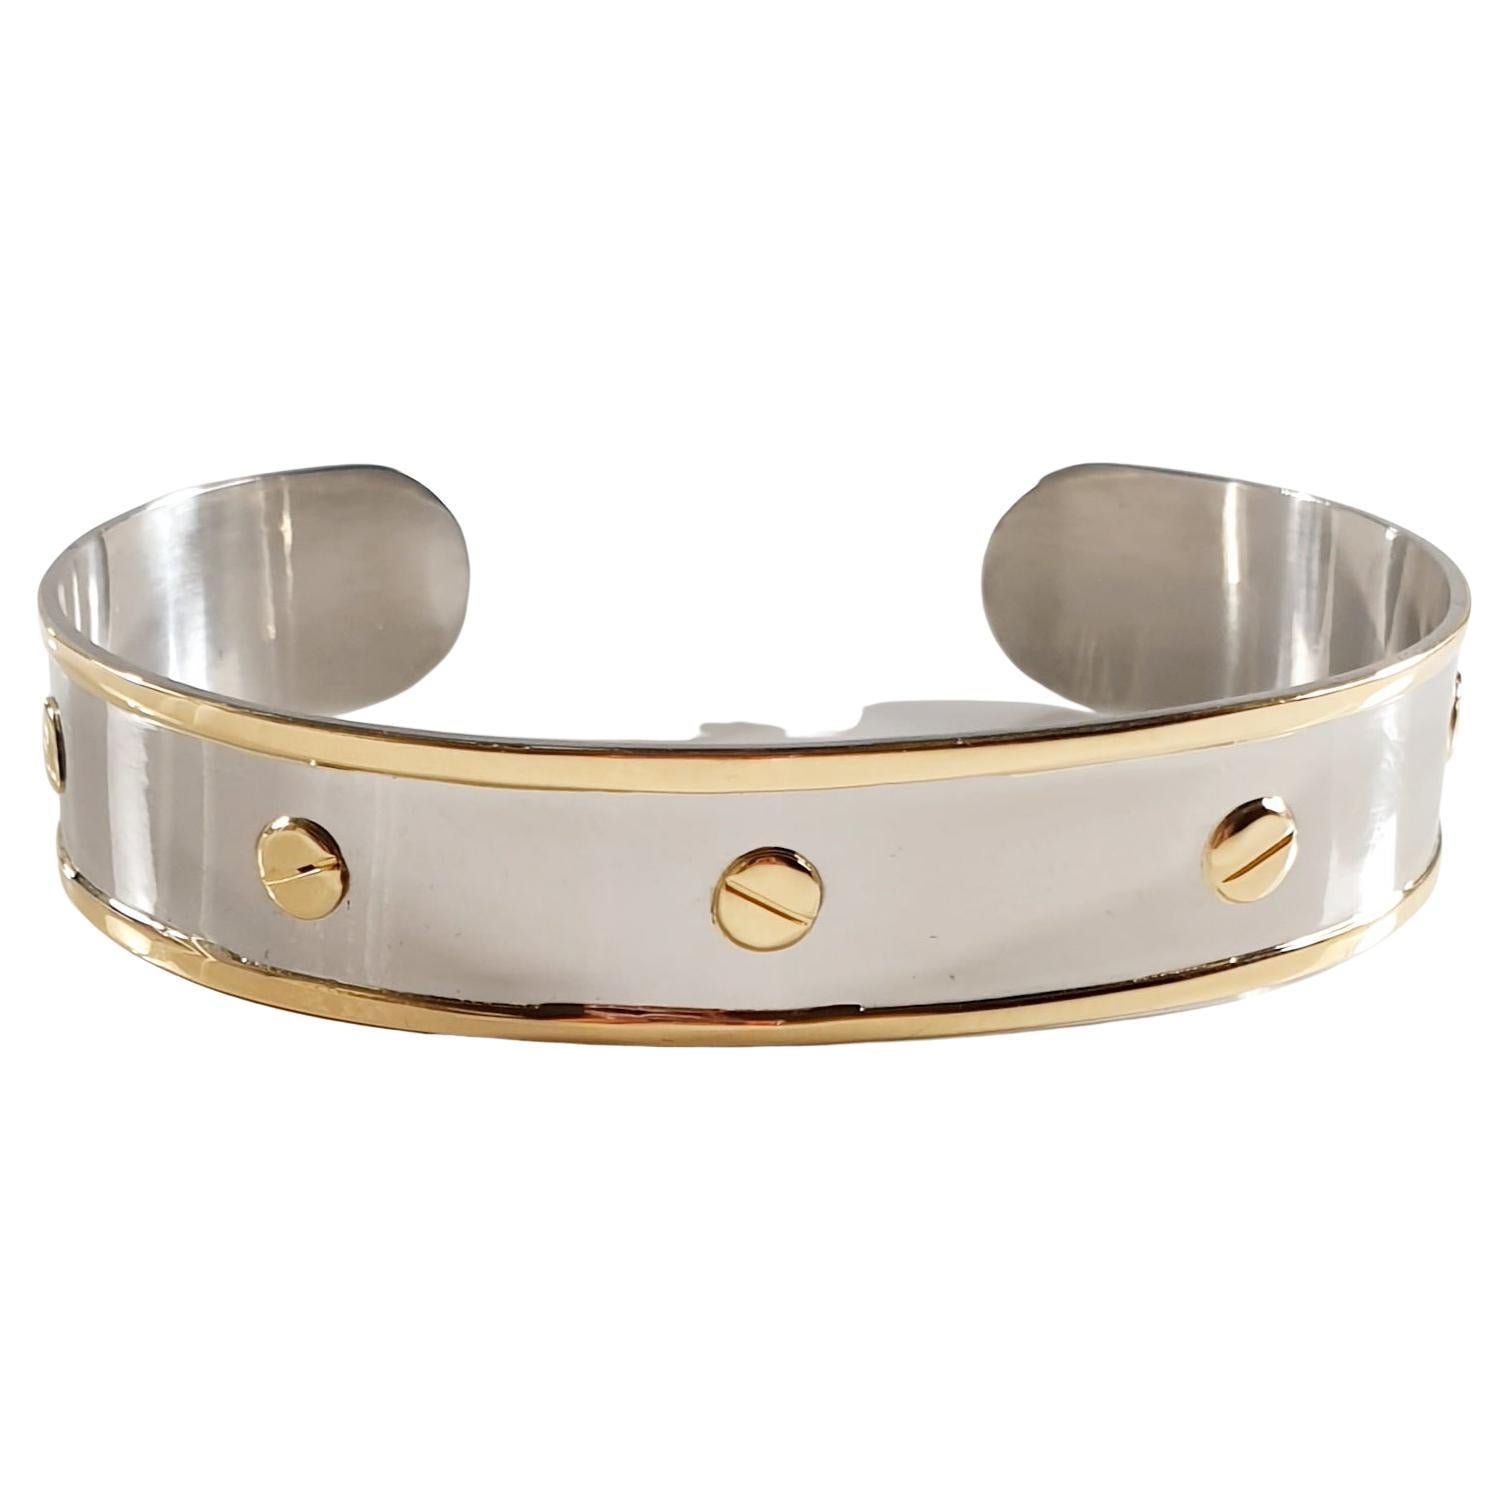 Bangle Love Bracelet in Stainless Steel and 18k Yellow Gold